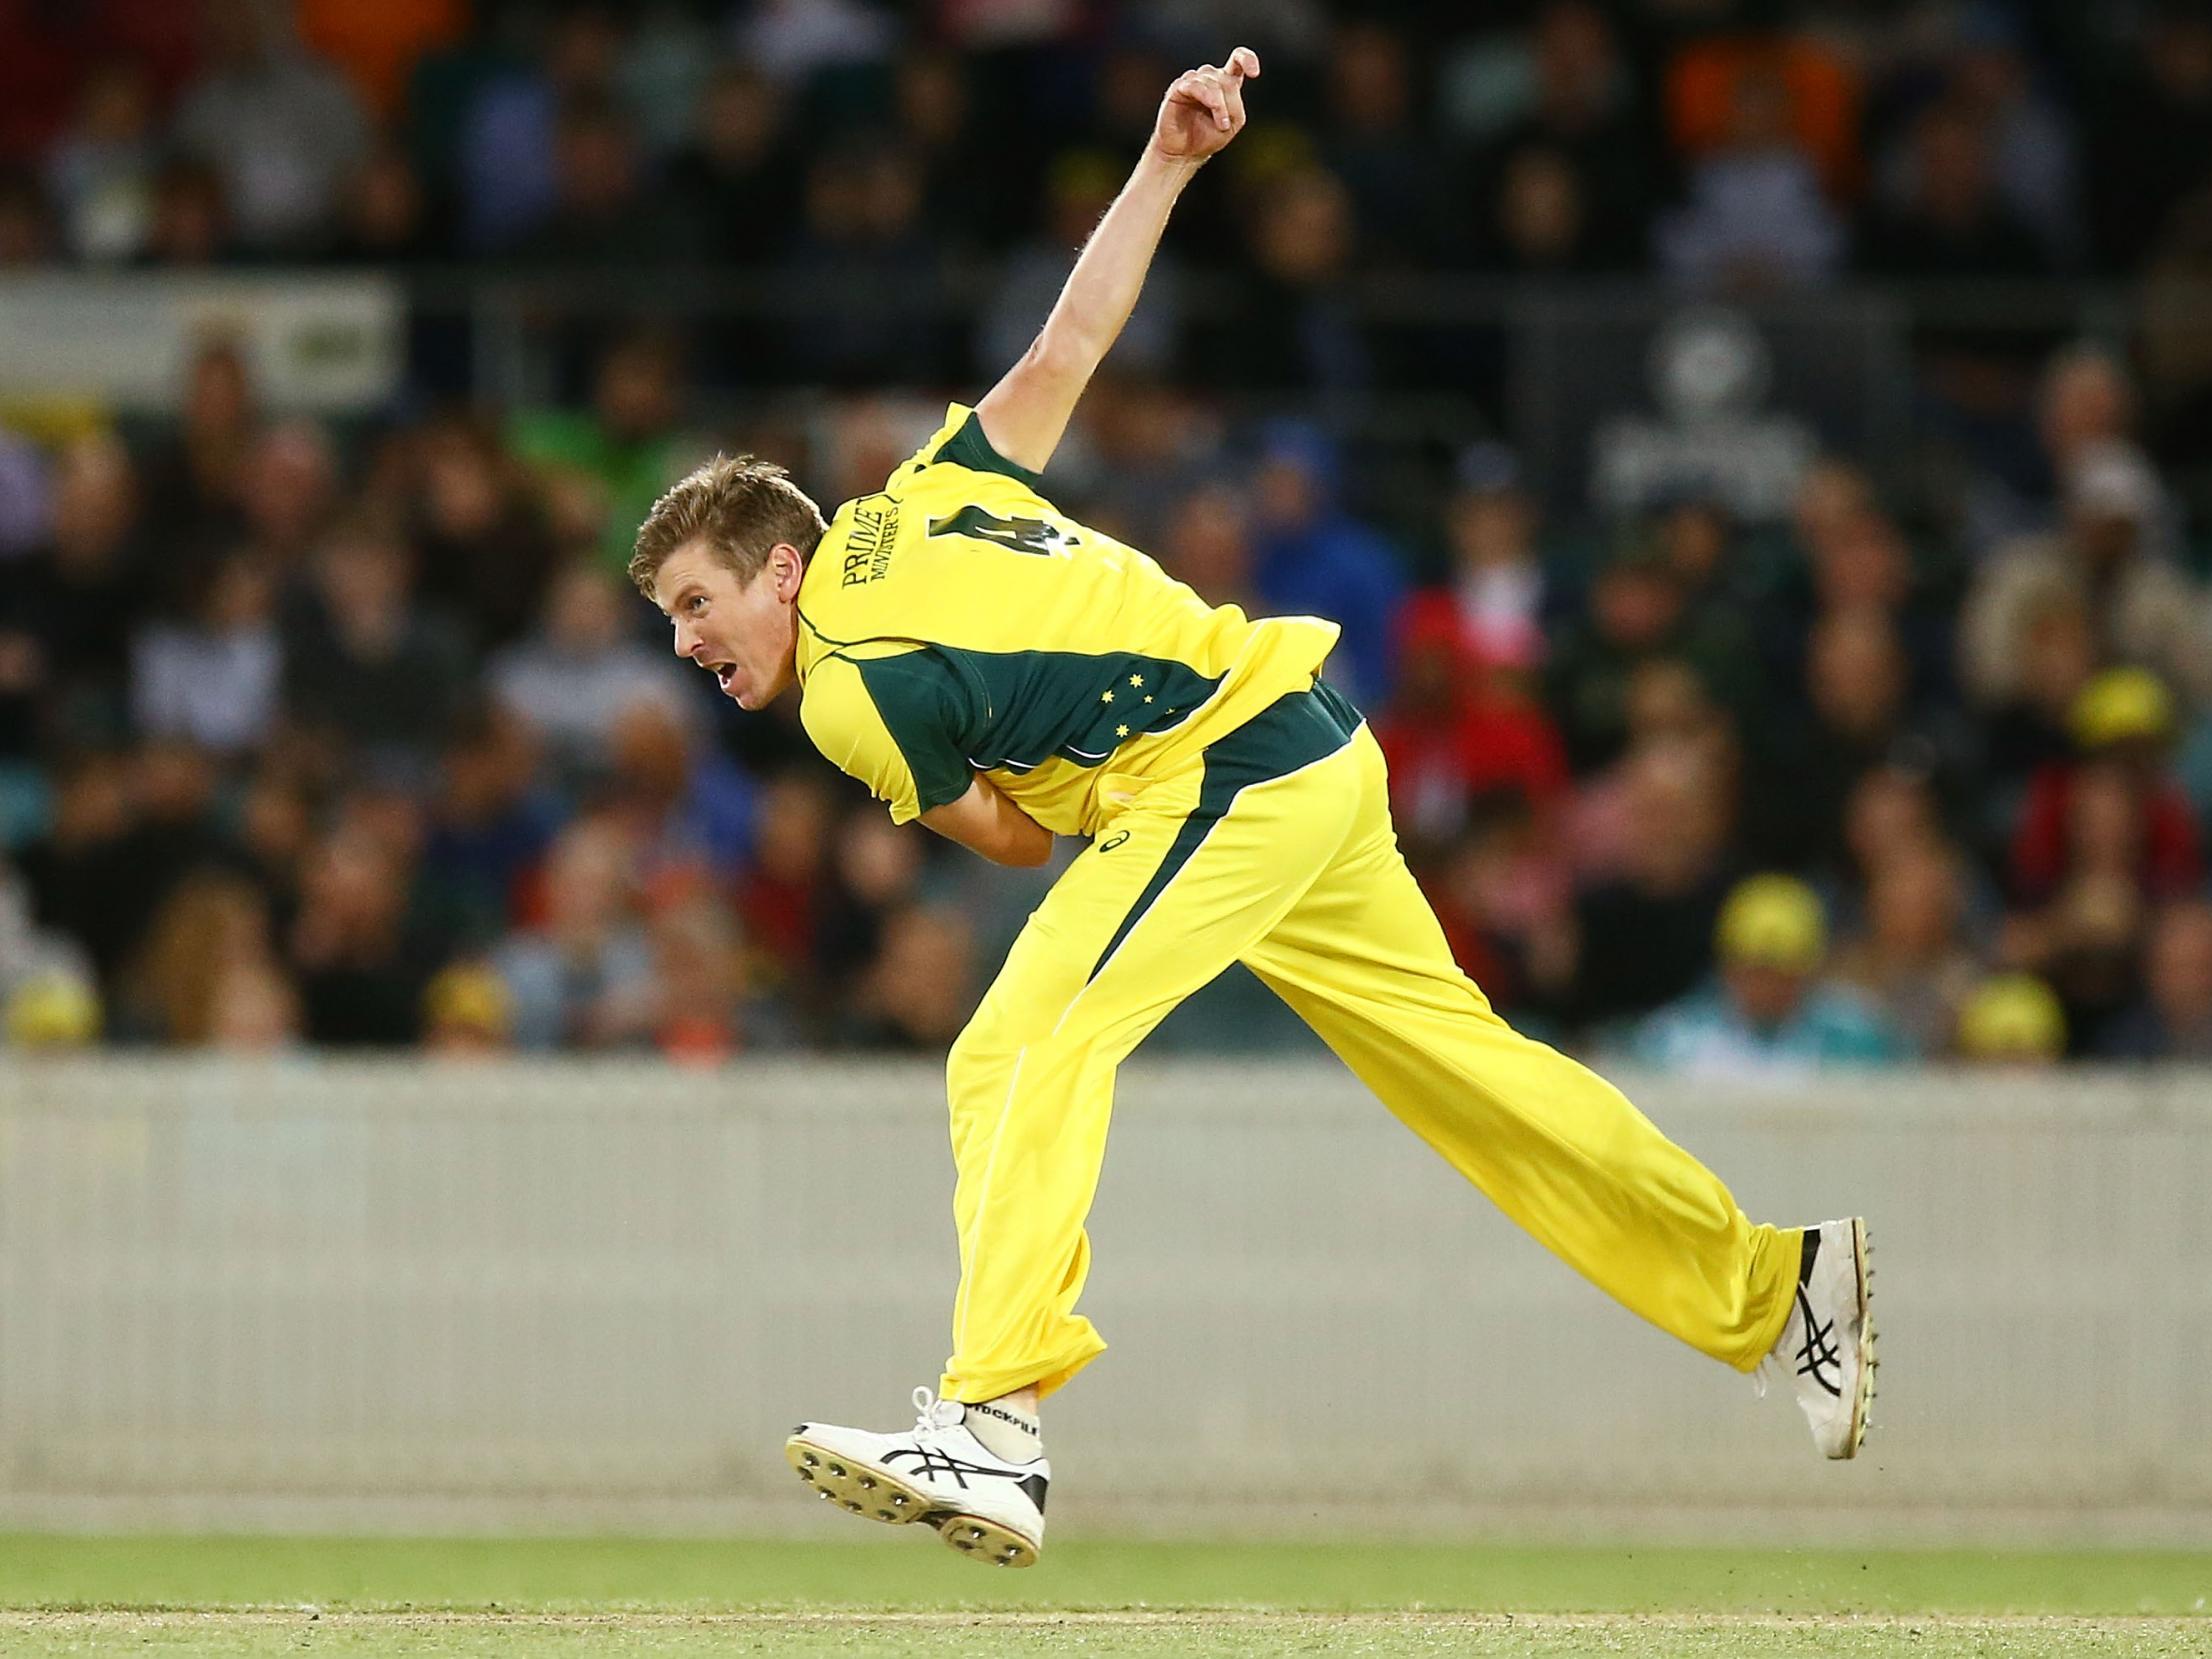 James Faulkner celebrated a five year anniversary with his housemate